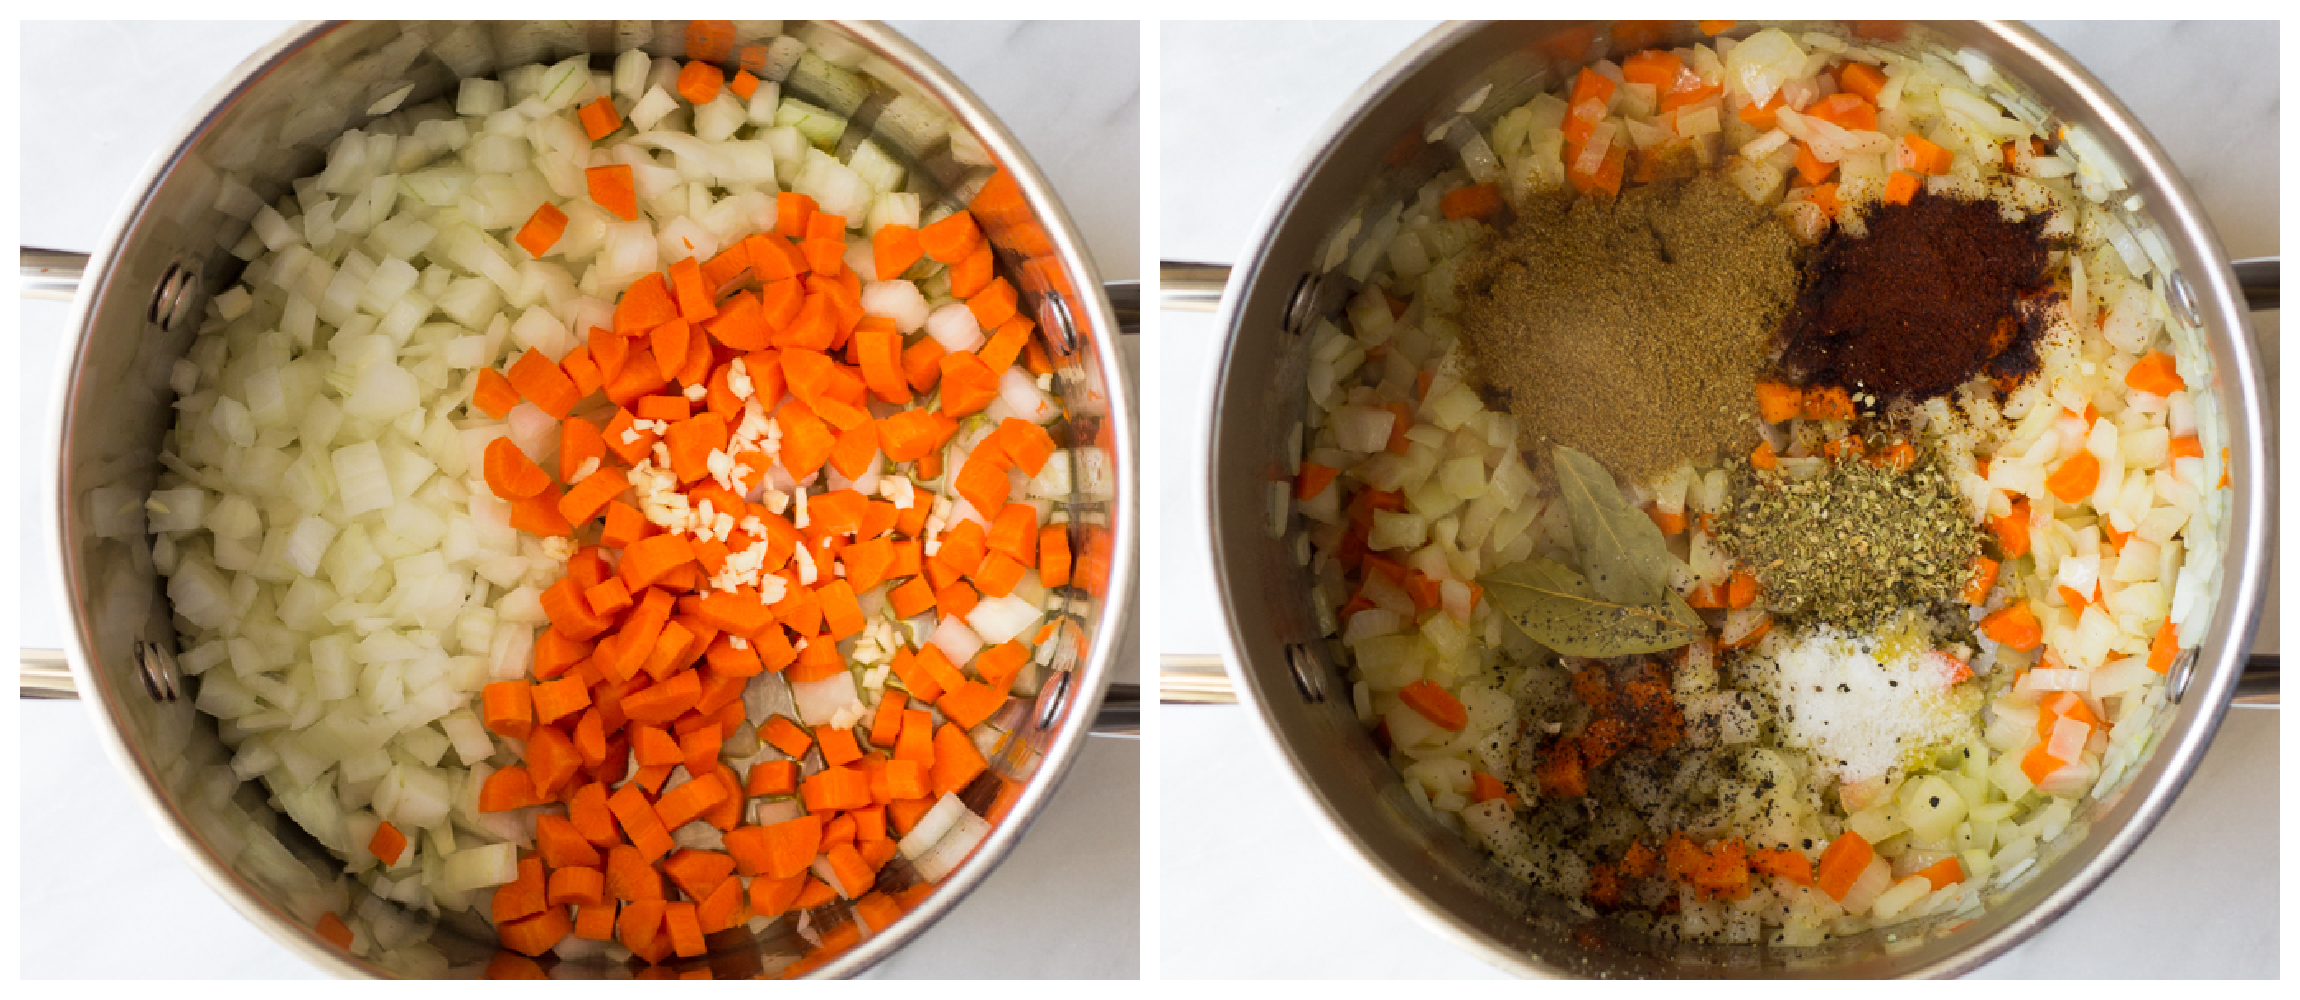 two soup pot photos showing cut up vegetables in one, and vegetables with spices in the second.